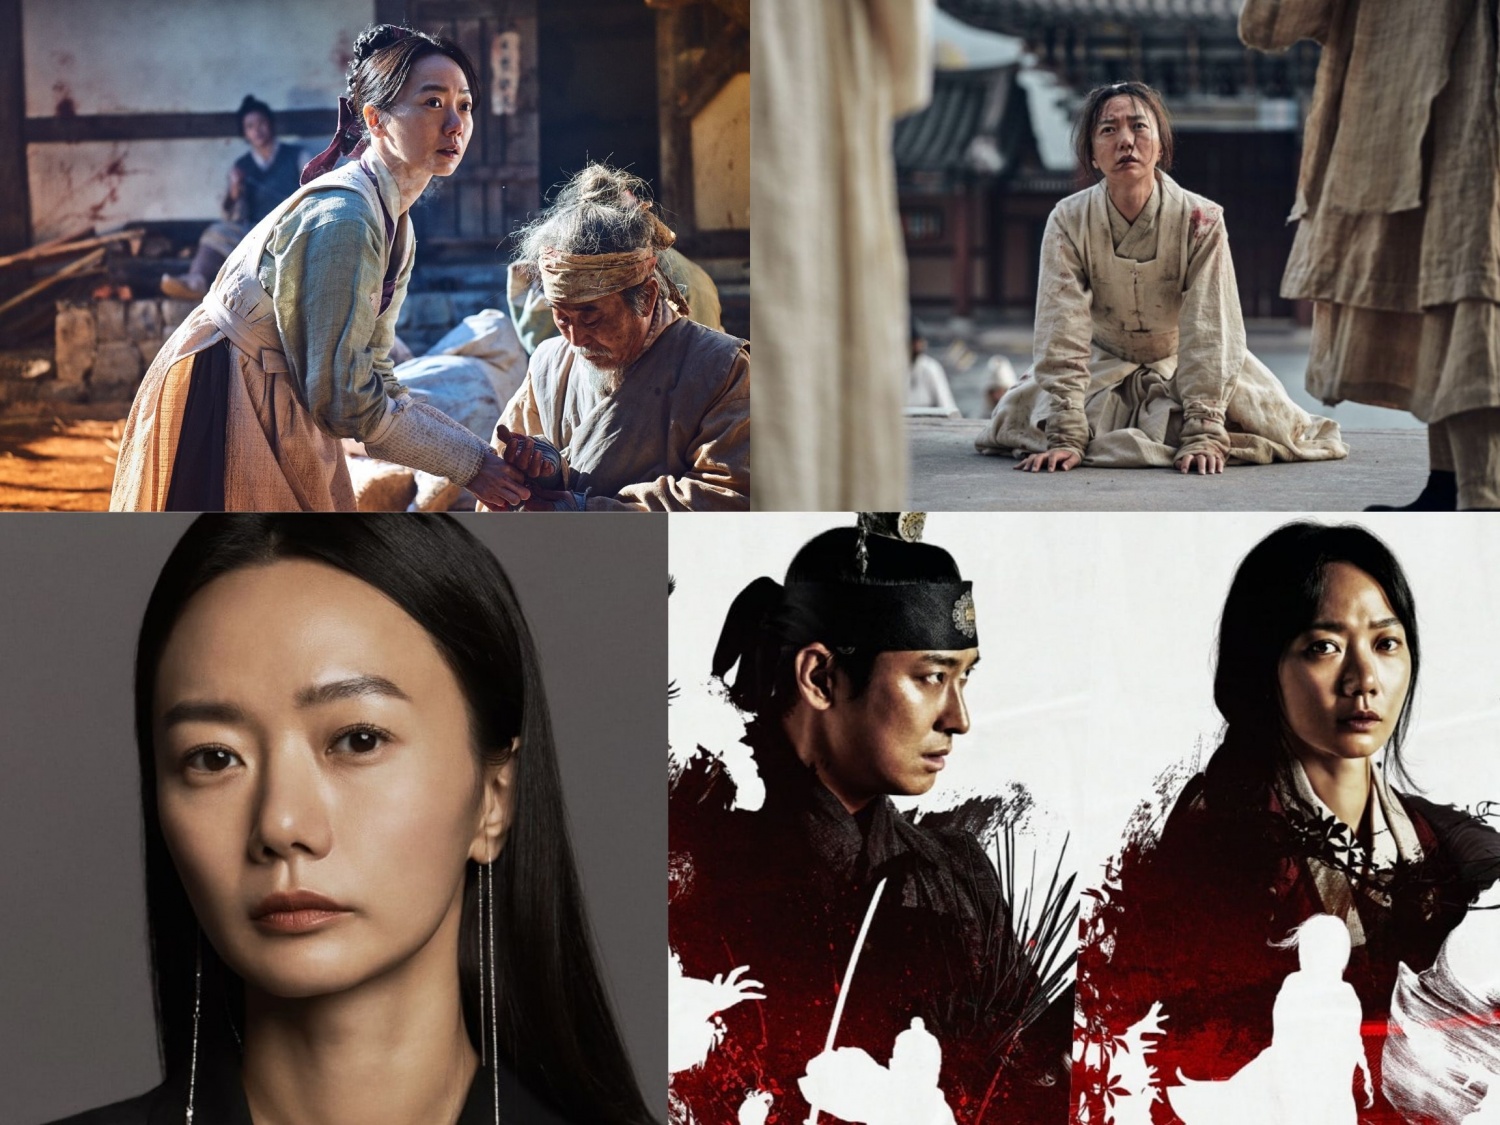 Bae Doona's Character in Kingdom Reminds Us of Our Brave and Selfless  Frontliners